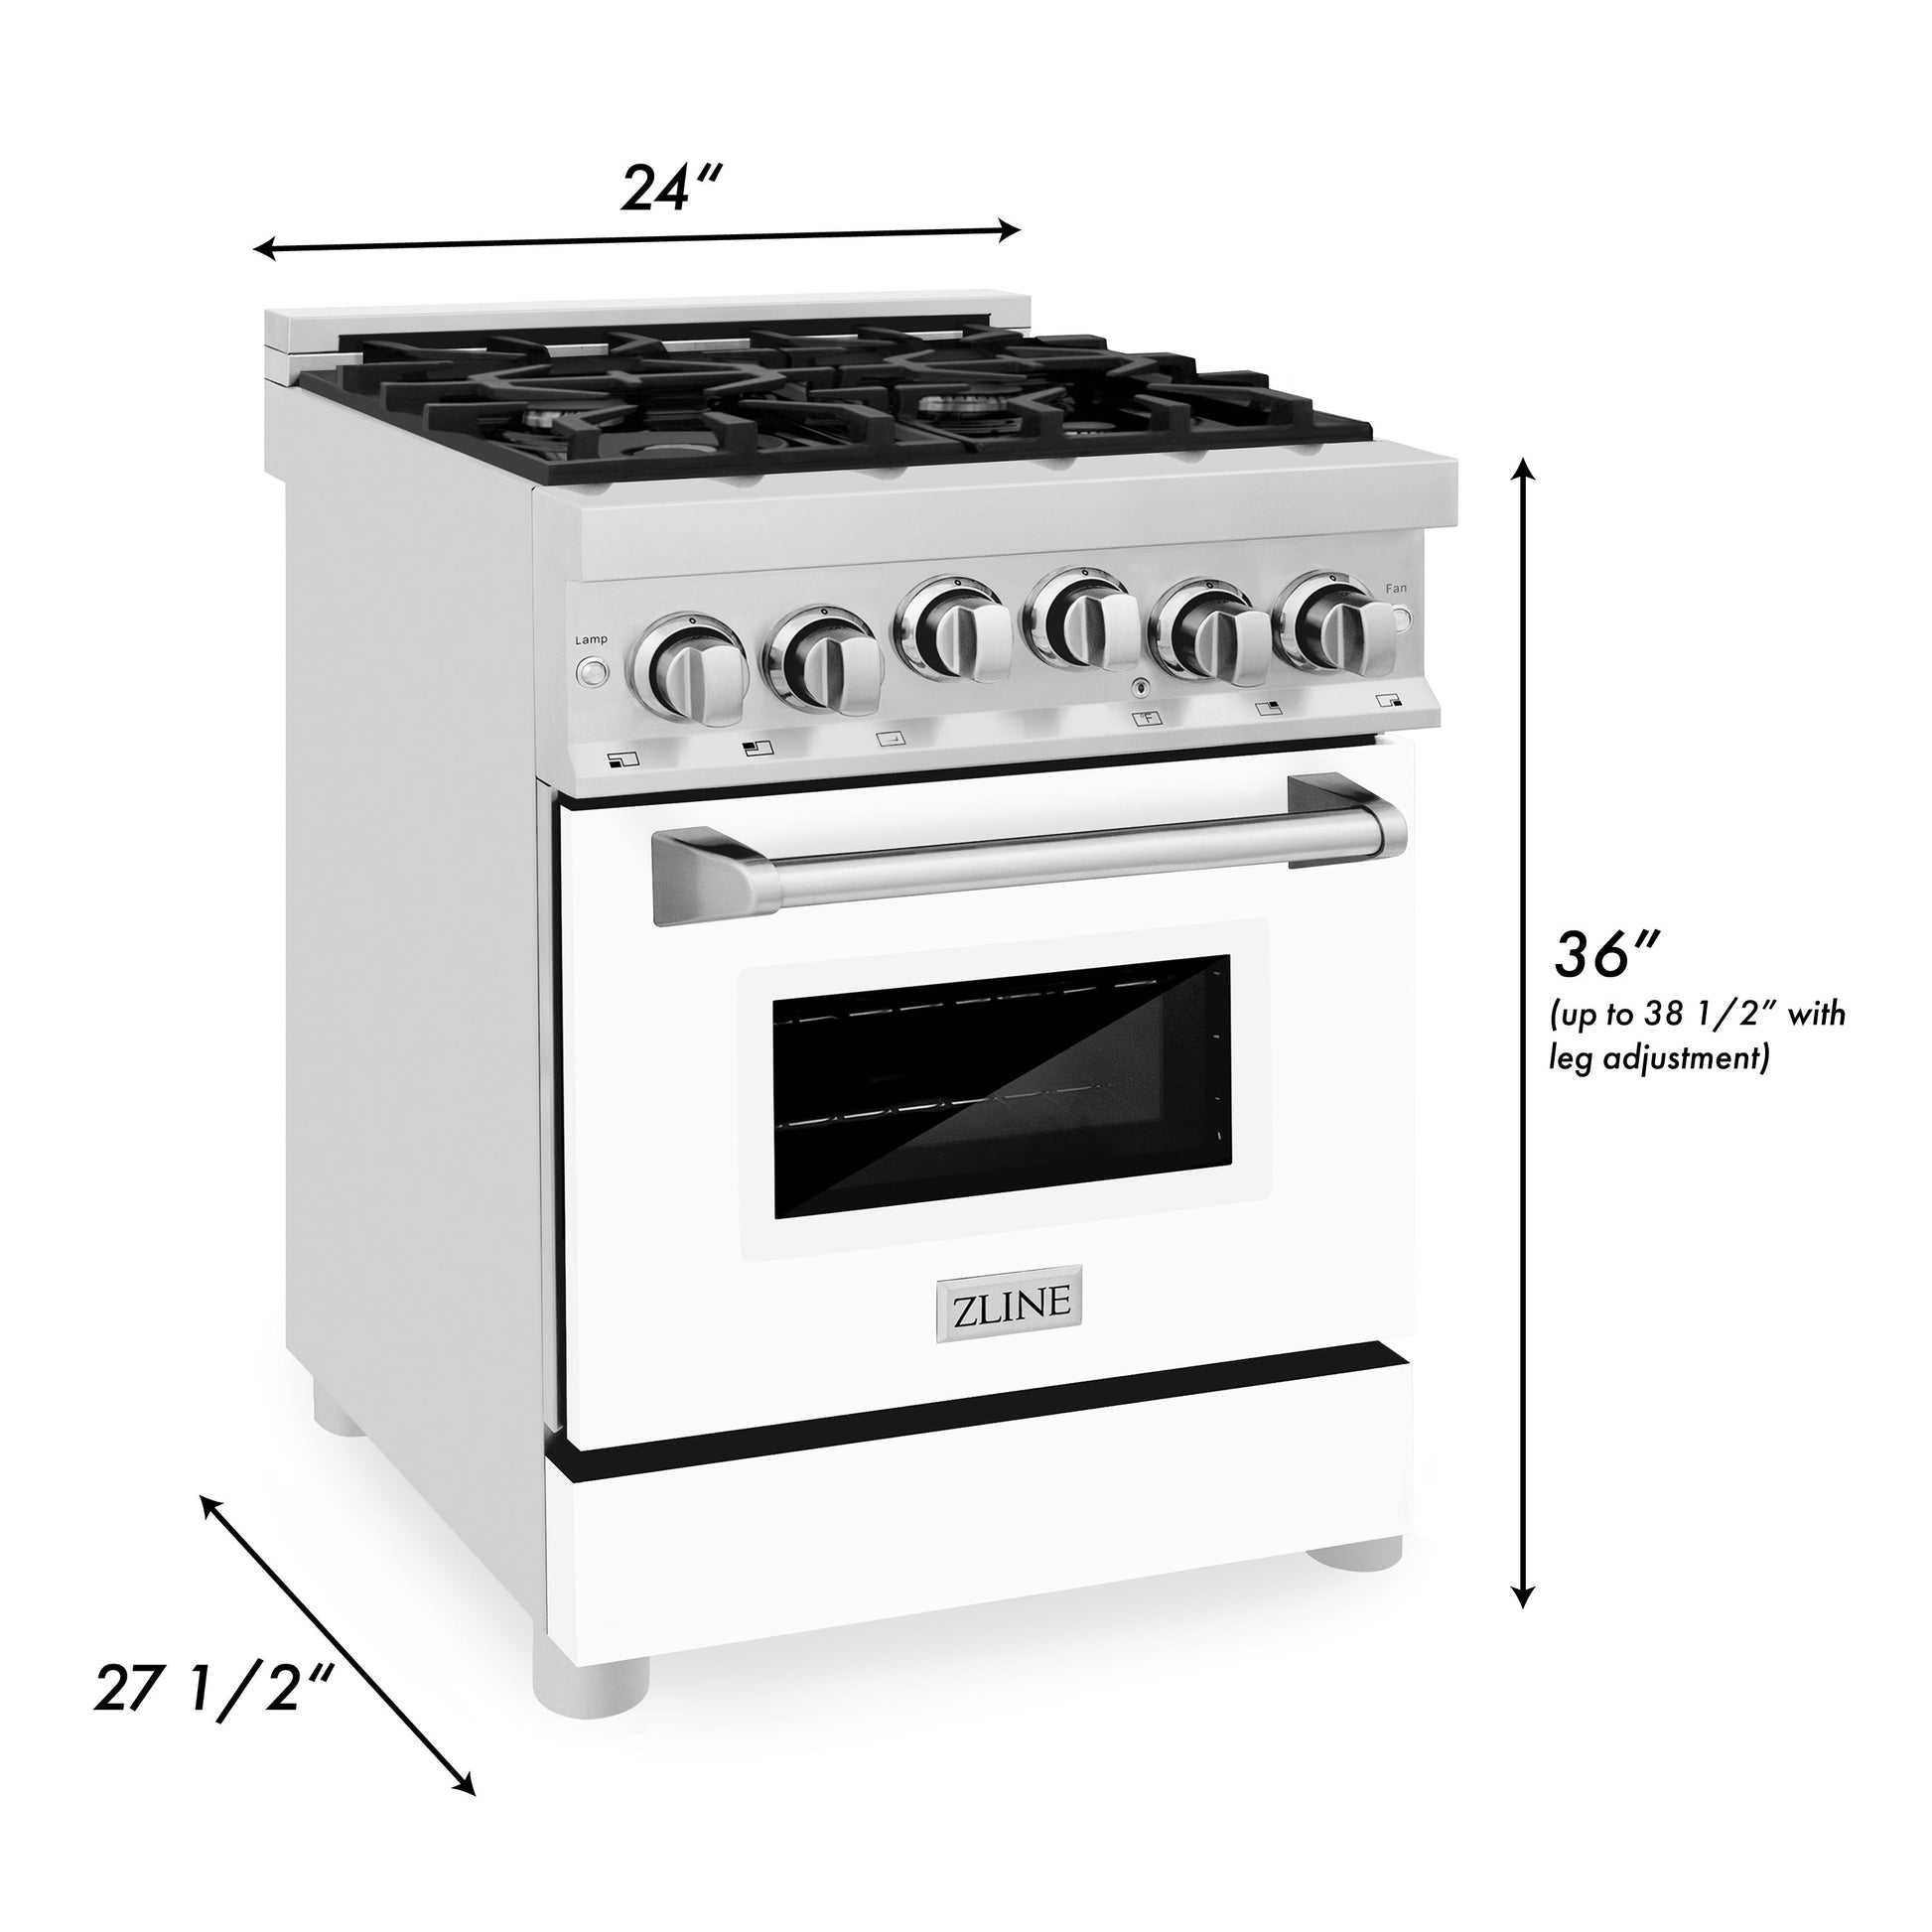 ZLINE 24" Gas Oven and Cooktop Range with Griddle - Stainless Steel with Matte White Door